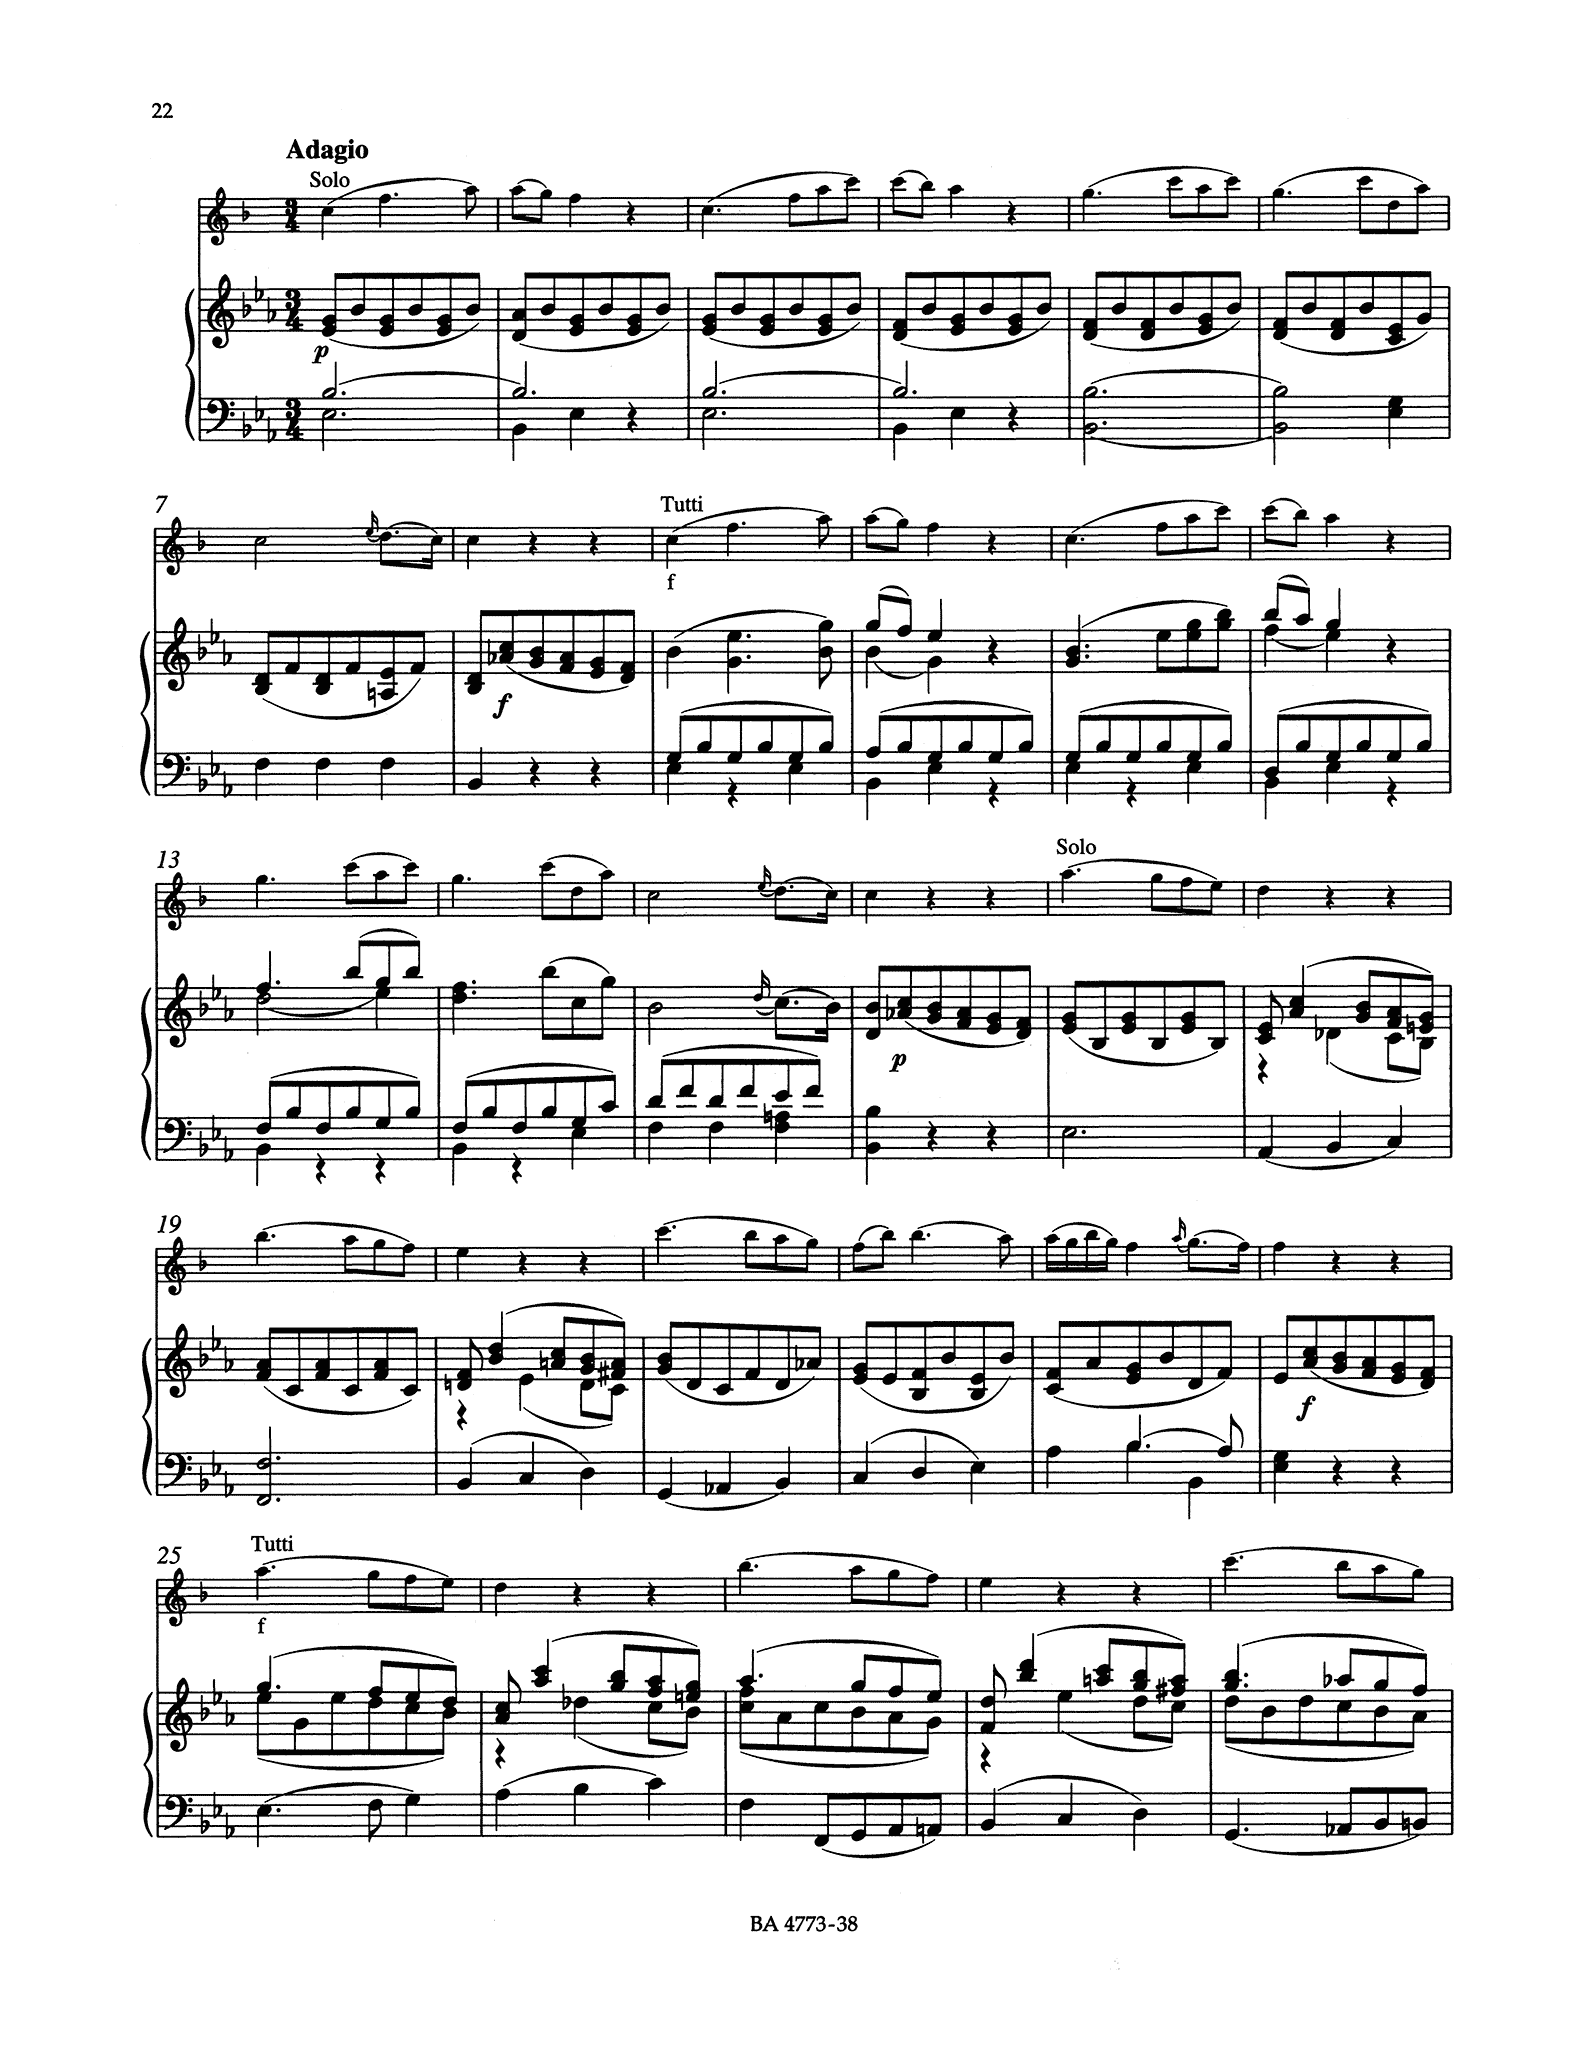 Mozart Clarinet Concerto K 622 transposed piano part for B-flat clarinet - Movement 2